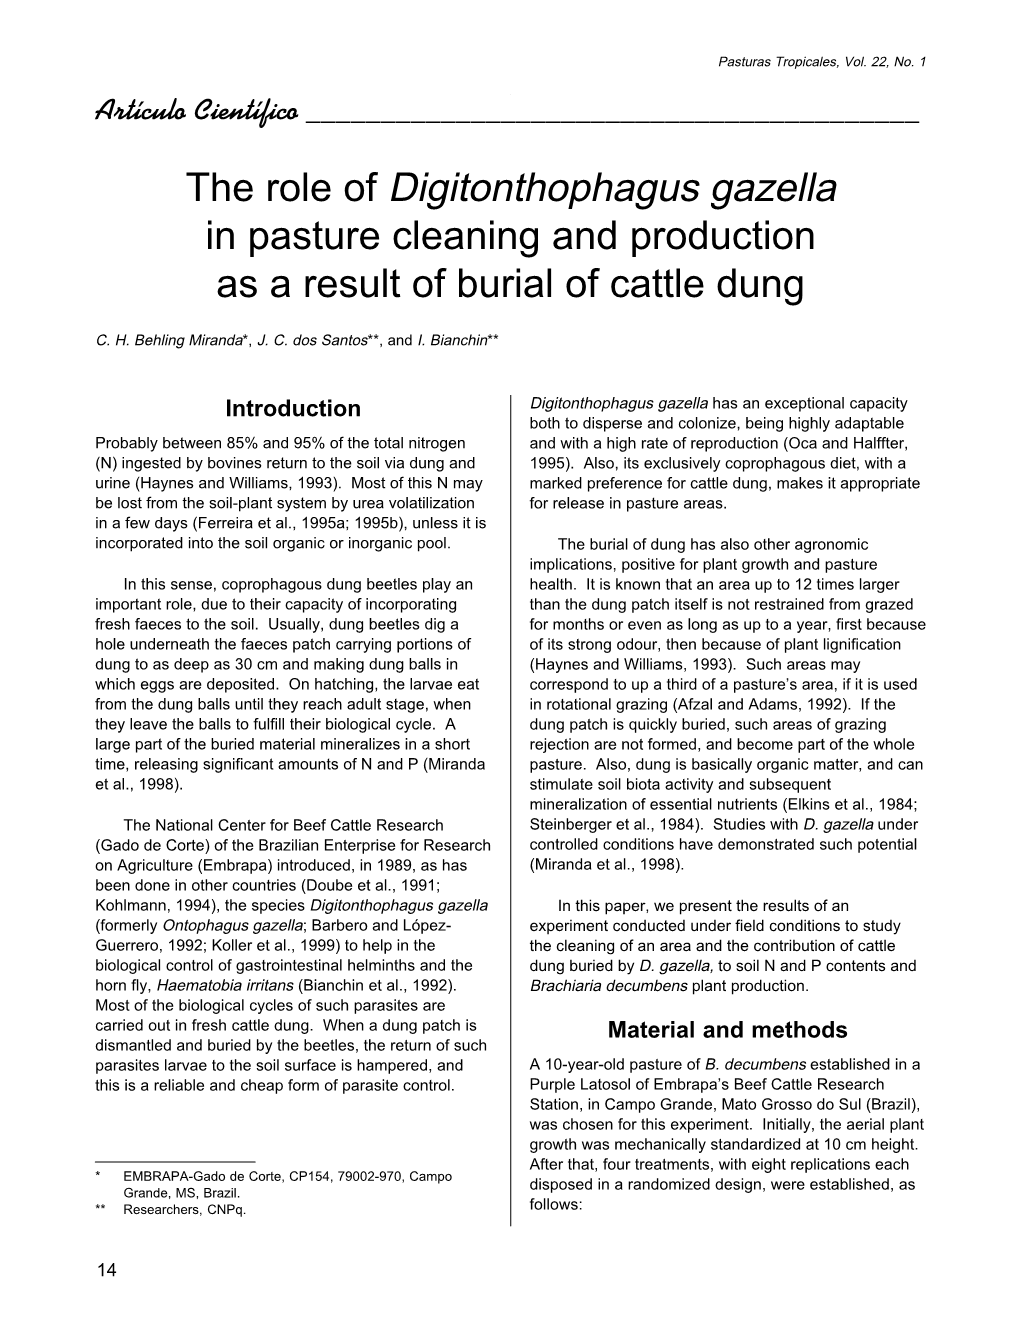 The Role of Digitonthophagus Gazella in Pasture Cleaning and Production As a Result of Burial of Cattle Dung